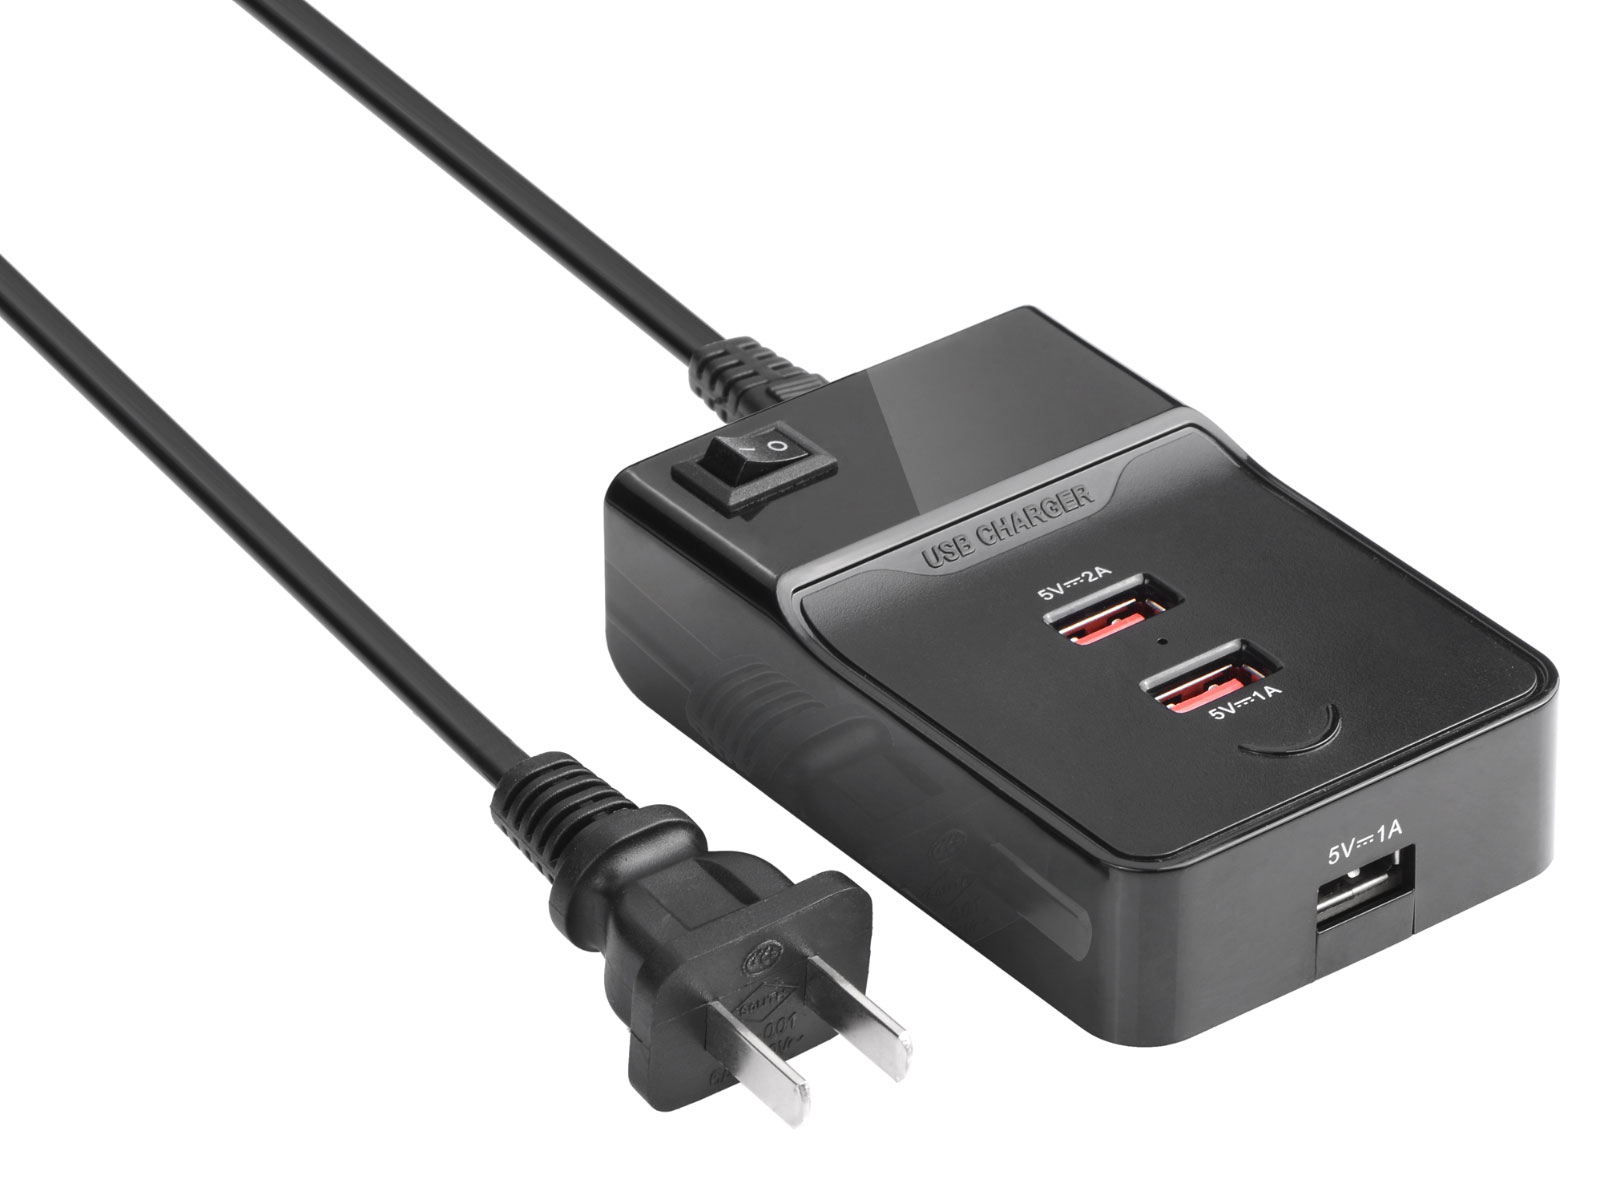 Astrotek USB Charging Station Charger Hub 3 Port 5V 3A with 1.5m Power Cable Black for iPhone Samsung iPad Tablet GPS LS